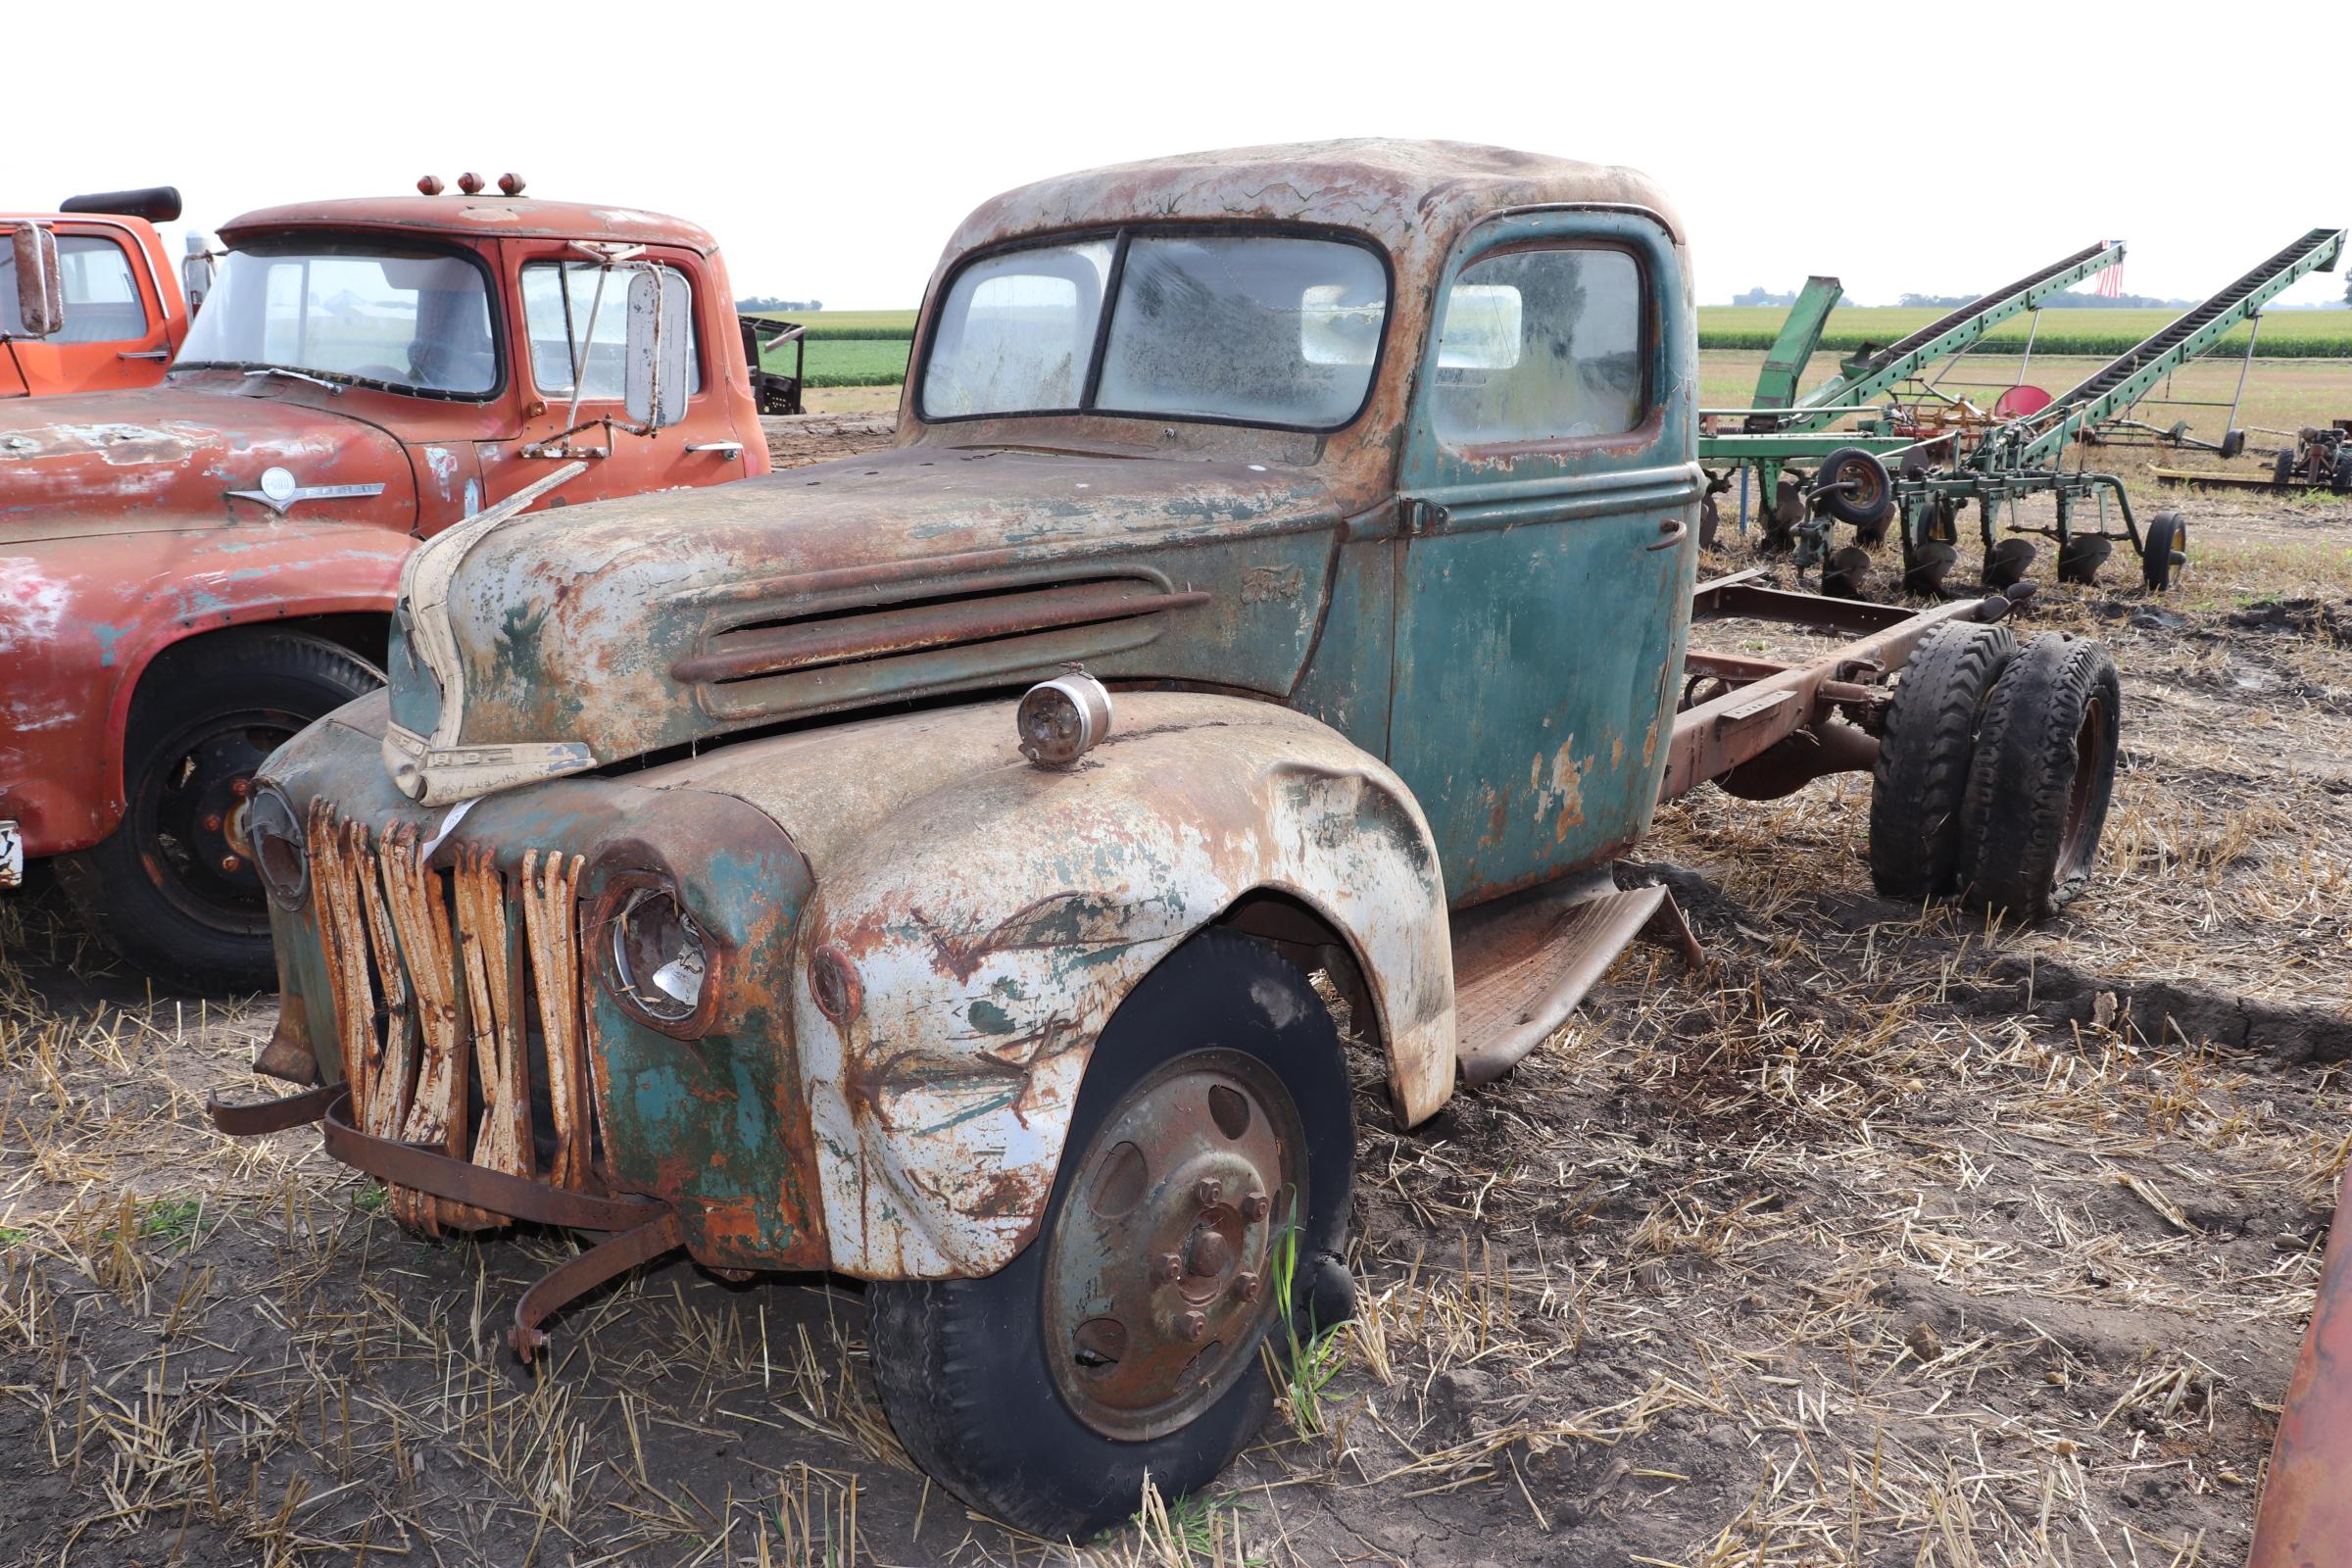 FORD TRUCK, SINGLE AXLE, NO ENGINE, UNABLE